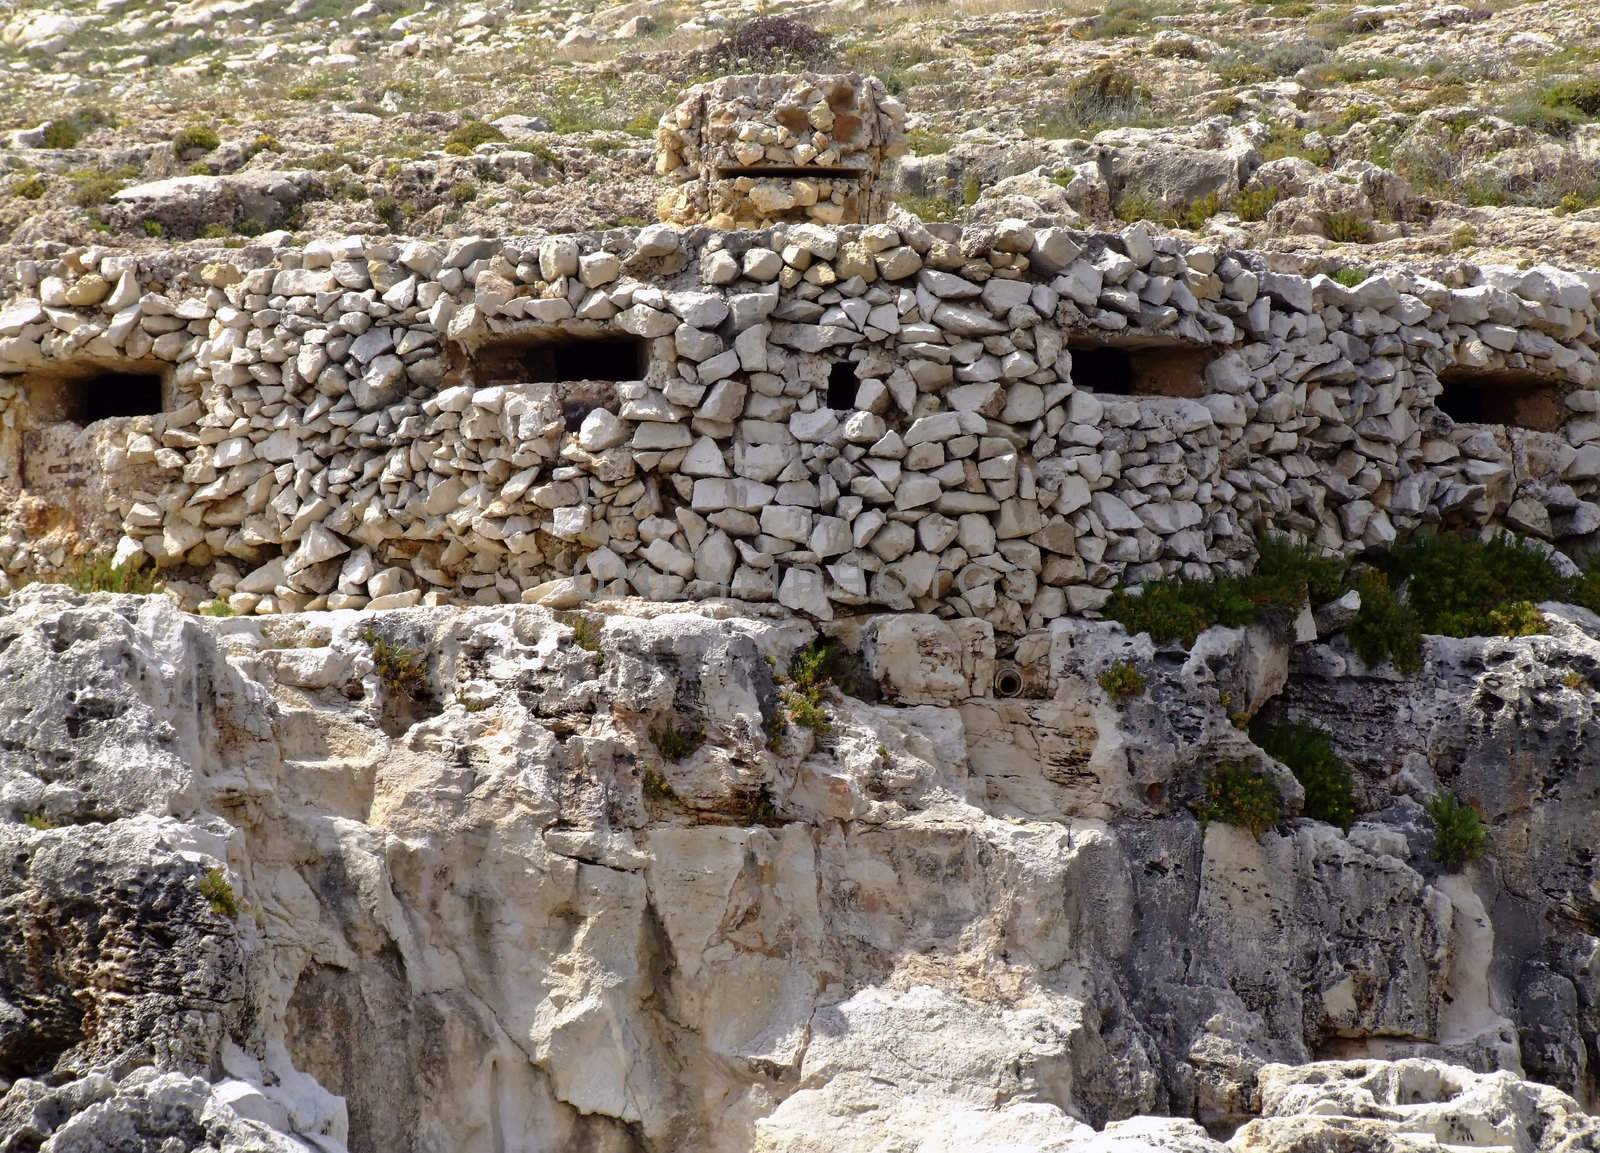 Typical WWII pill-box, or machine-gun turret, used for coastline defence in Malta. Note the clever use of camouflage by using similar rocks from the surrounding environment to build the post.